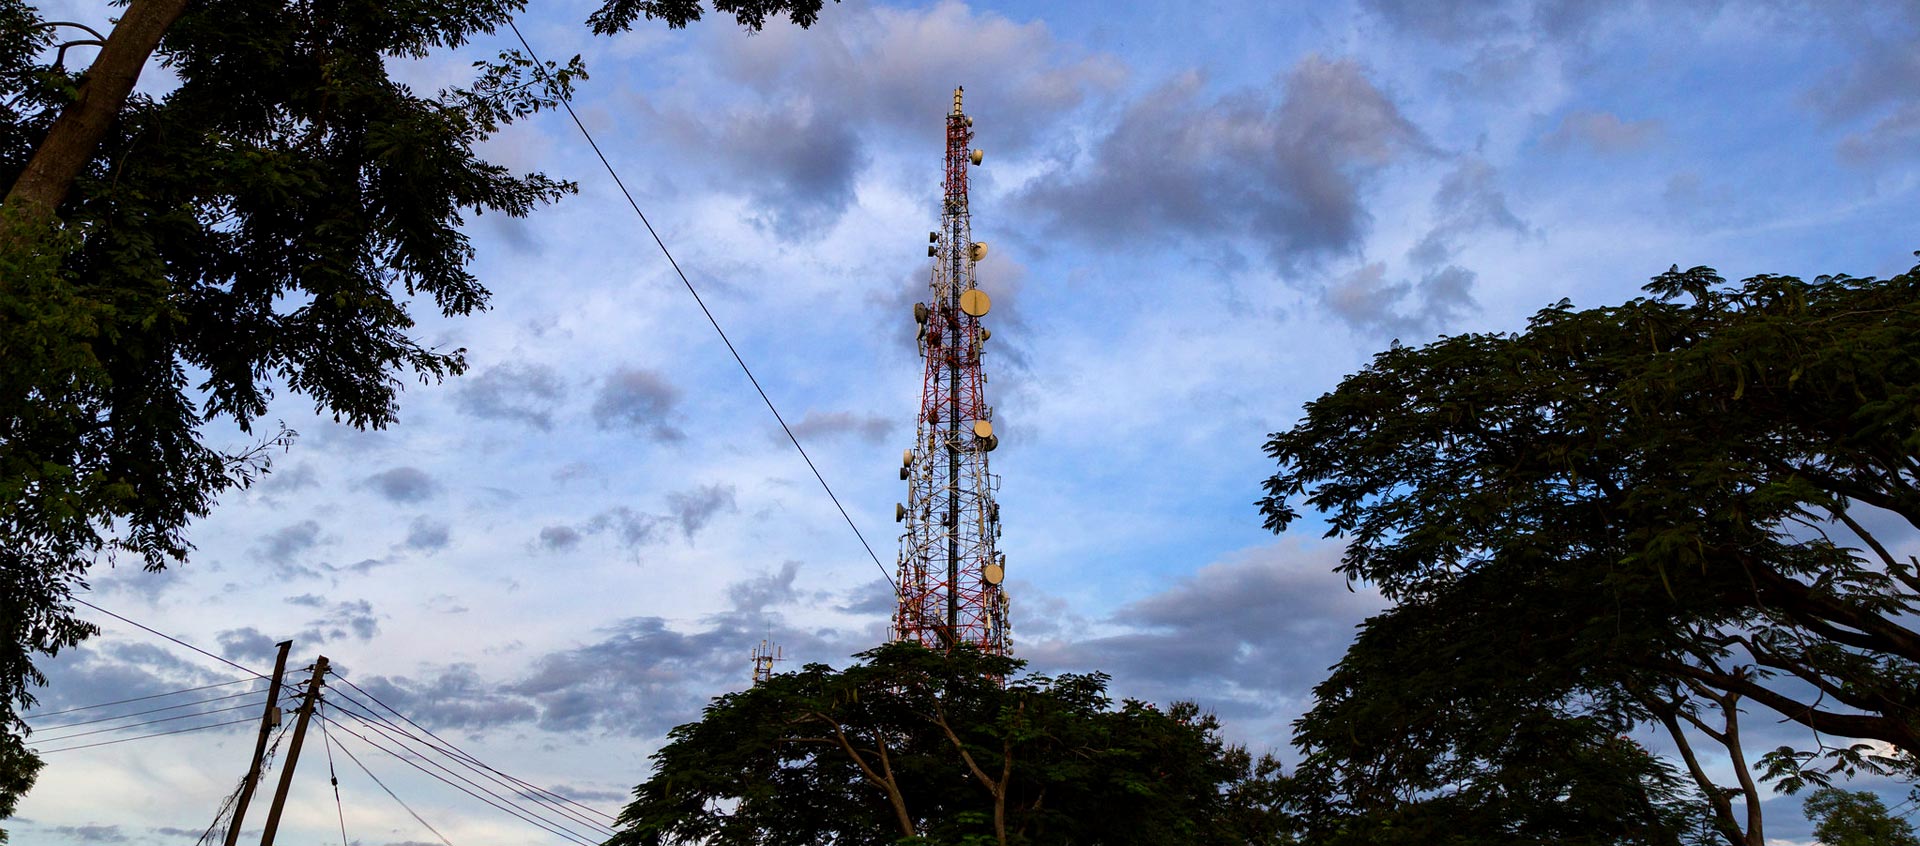 Telecommunications tower in Malawi